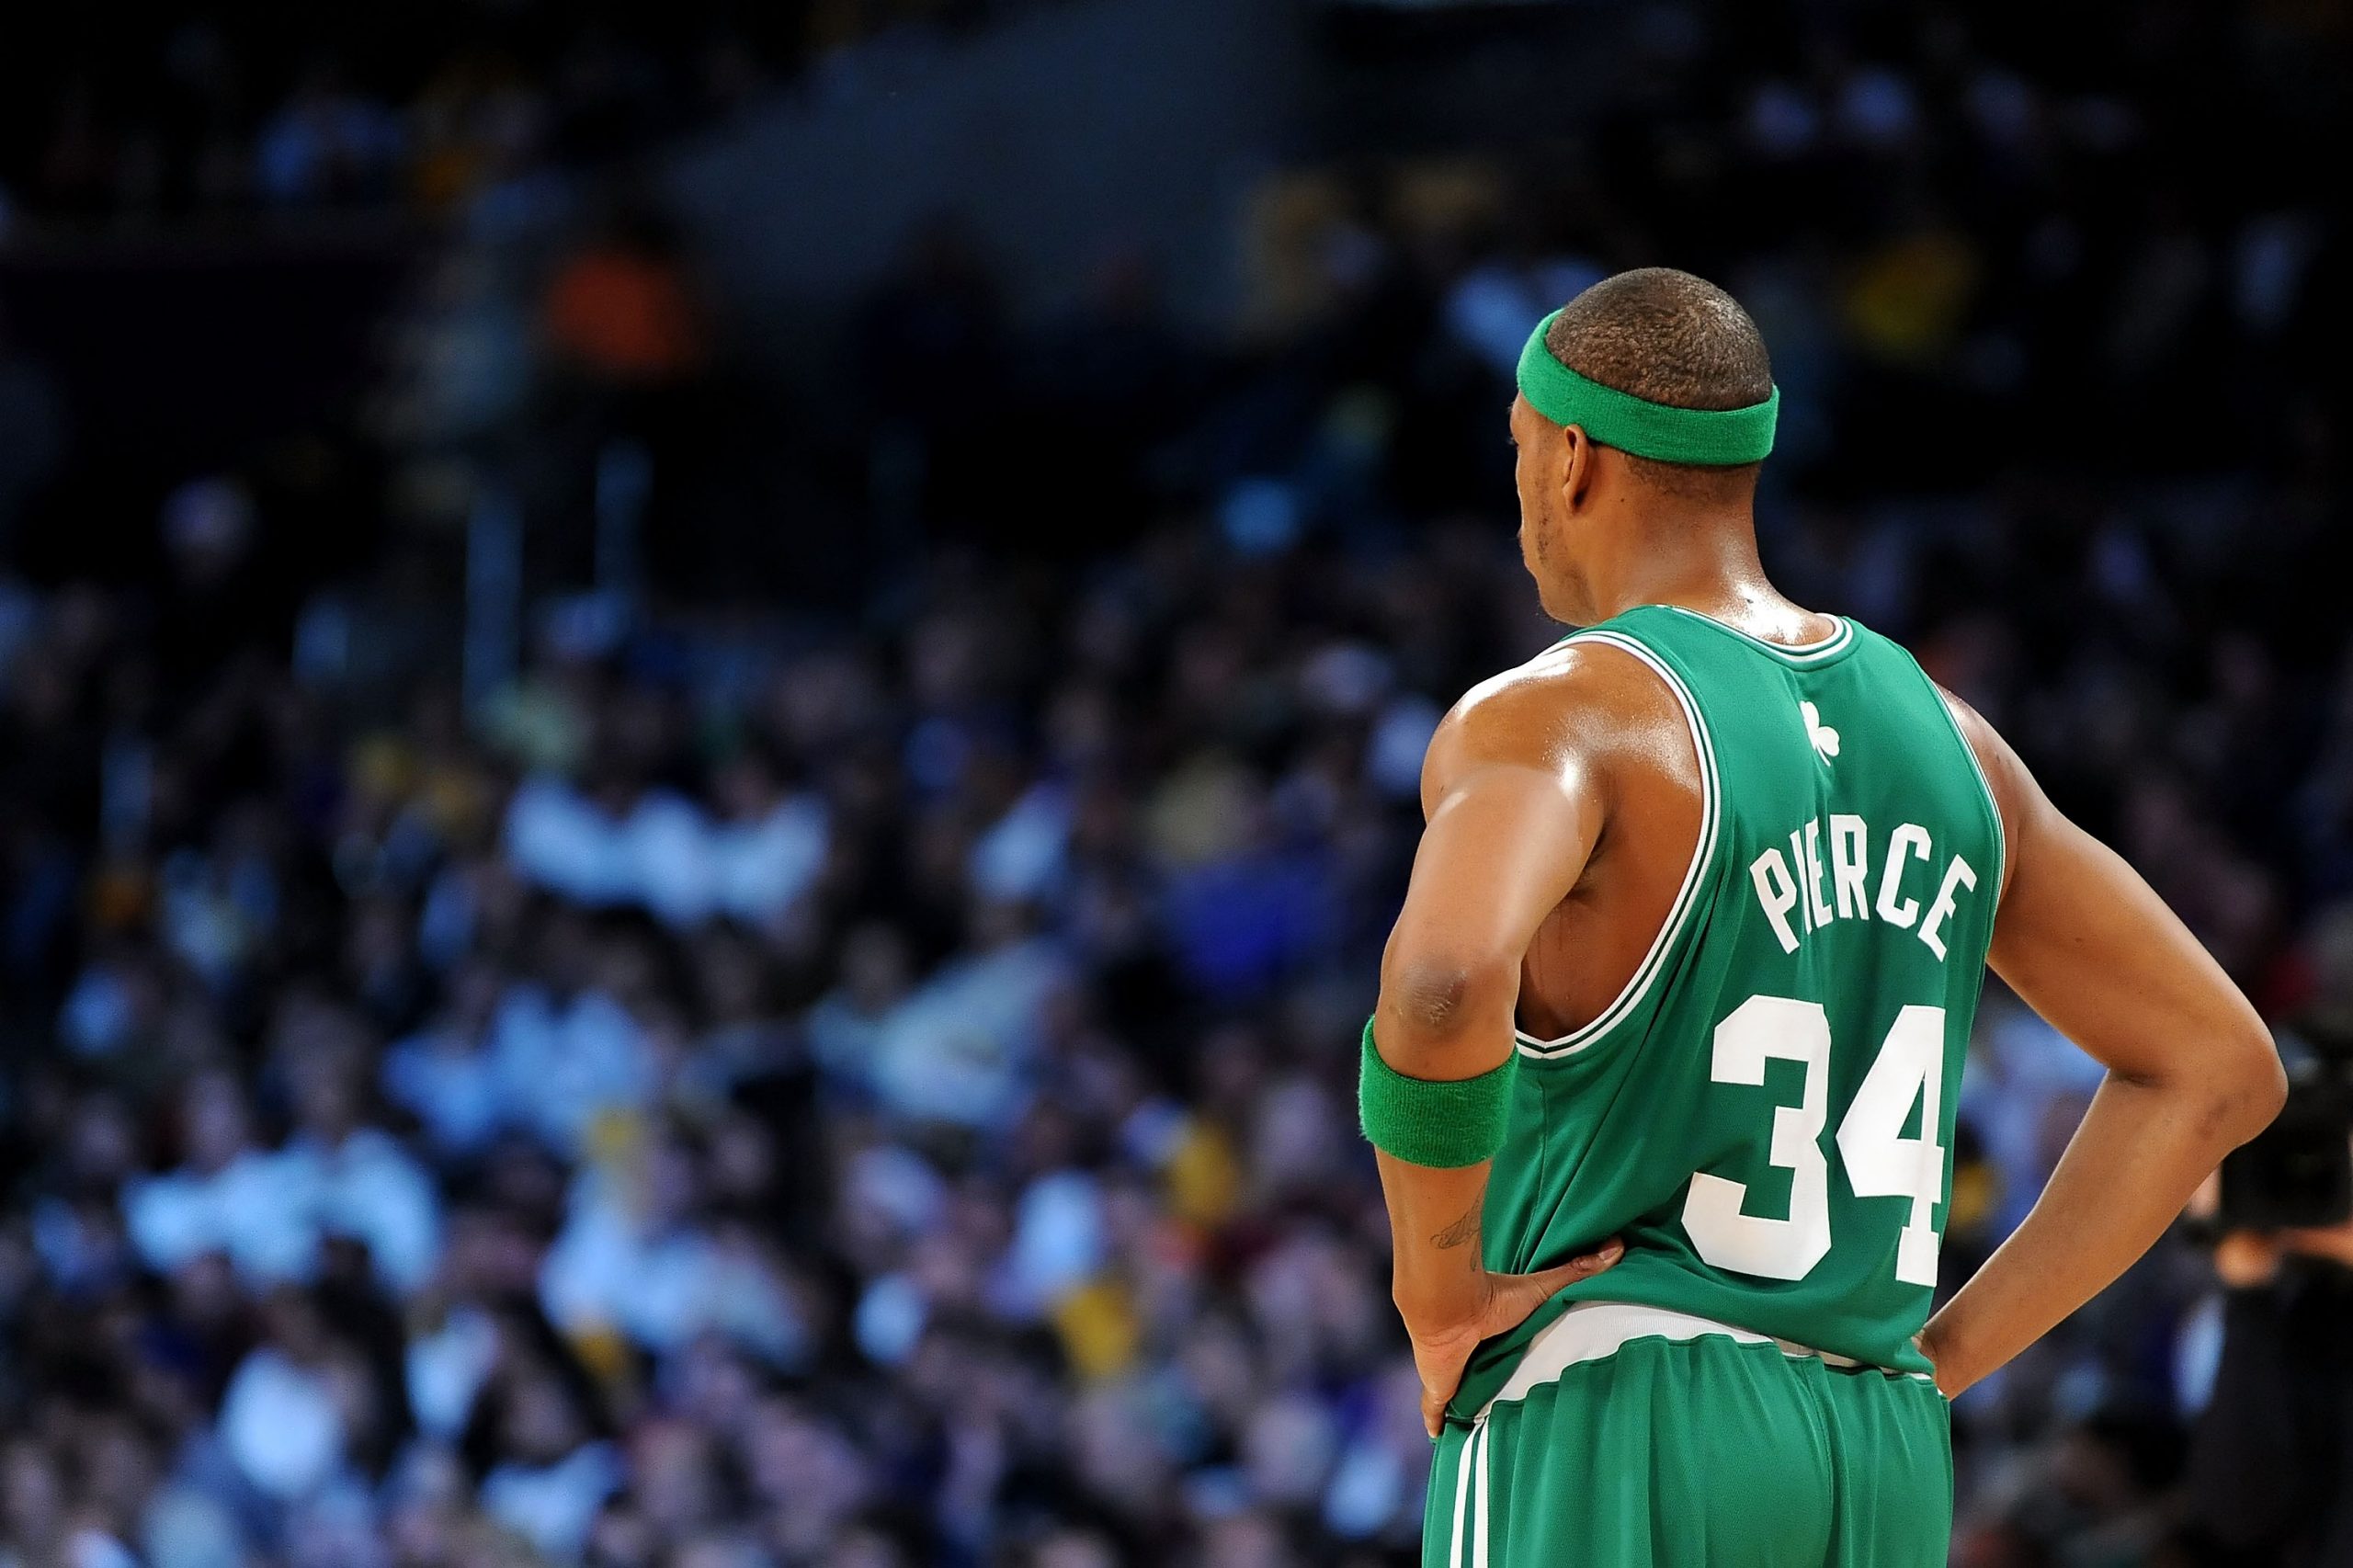 Paul Pierce elected to Naismith Memorial Basketball Hall of Fame